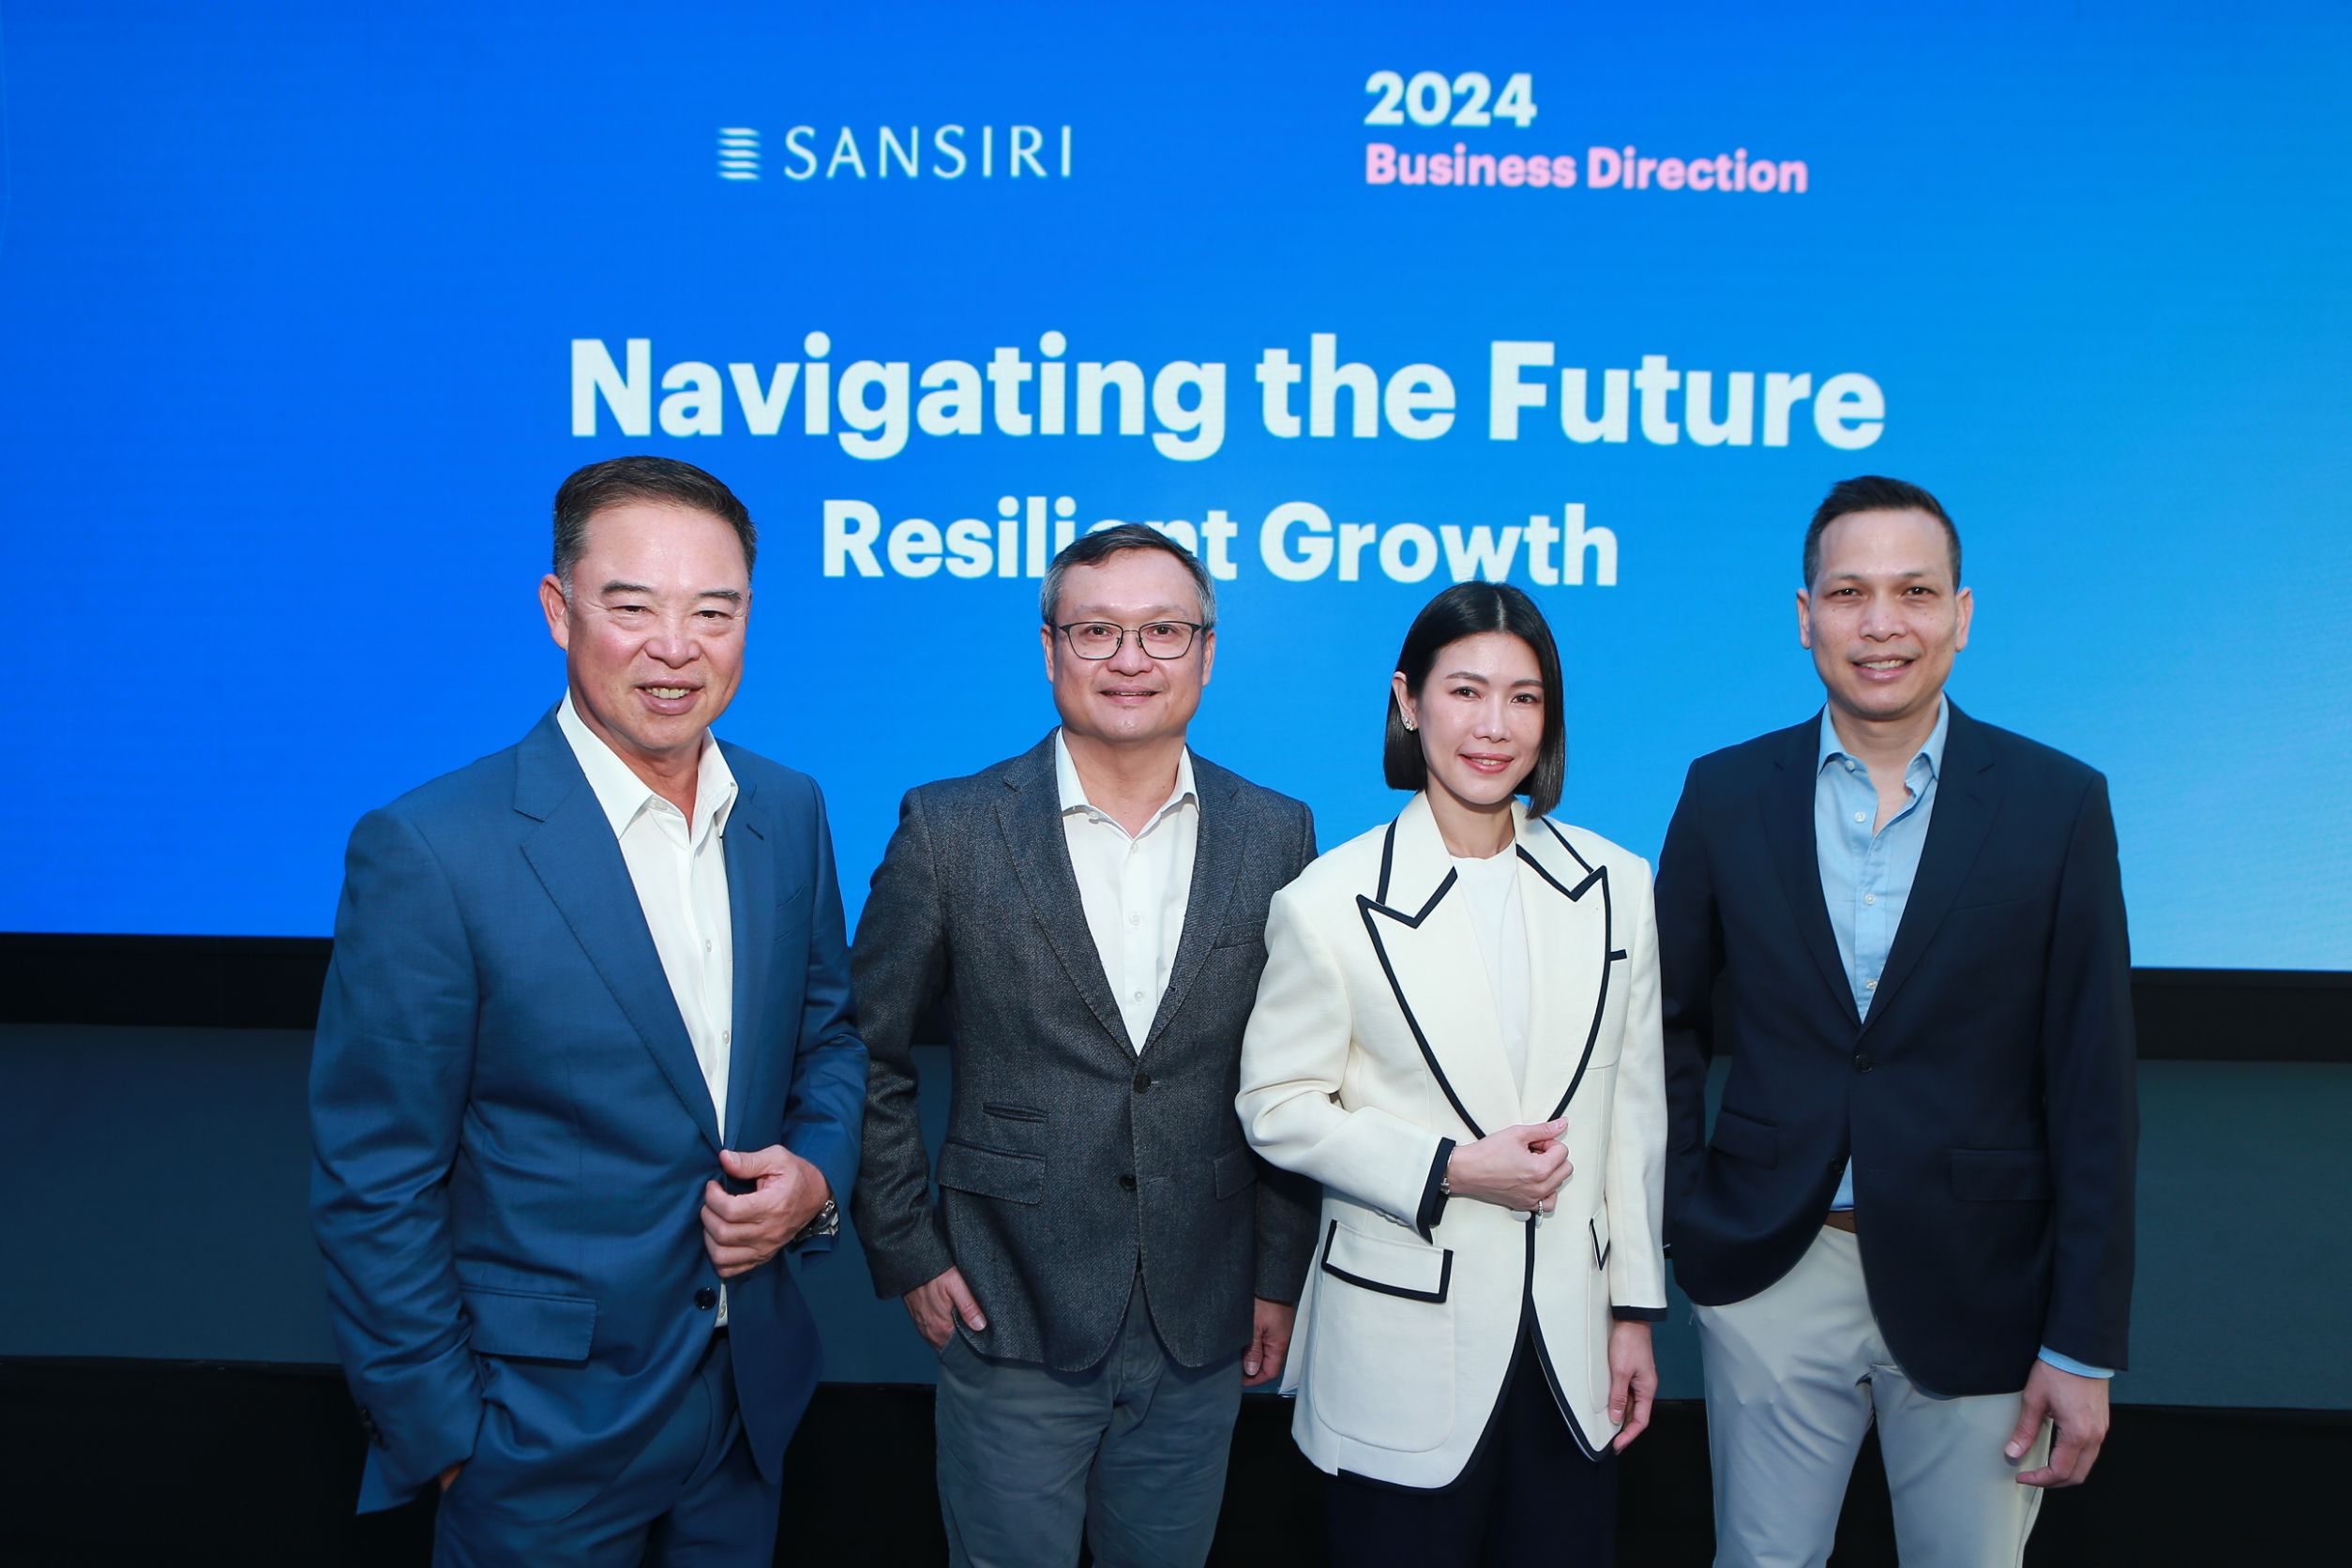 Marking Its 40th Year, Sansiri Sets Course toward “Resilient Growth”